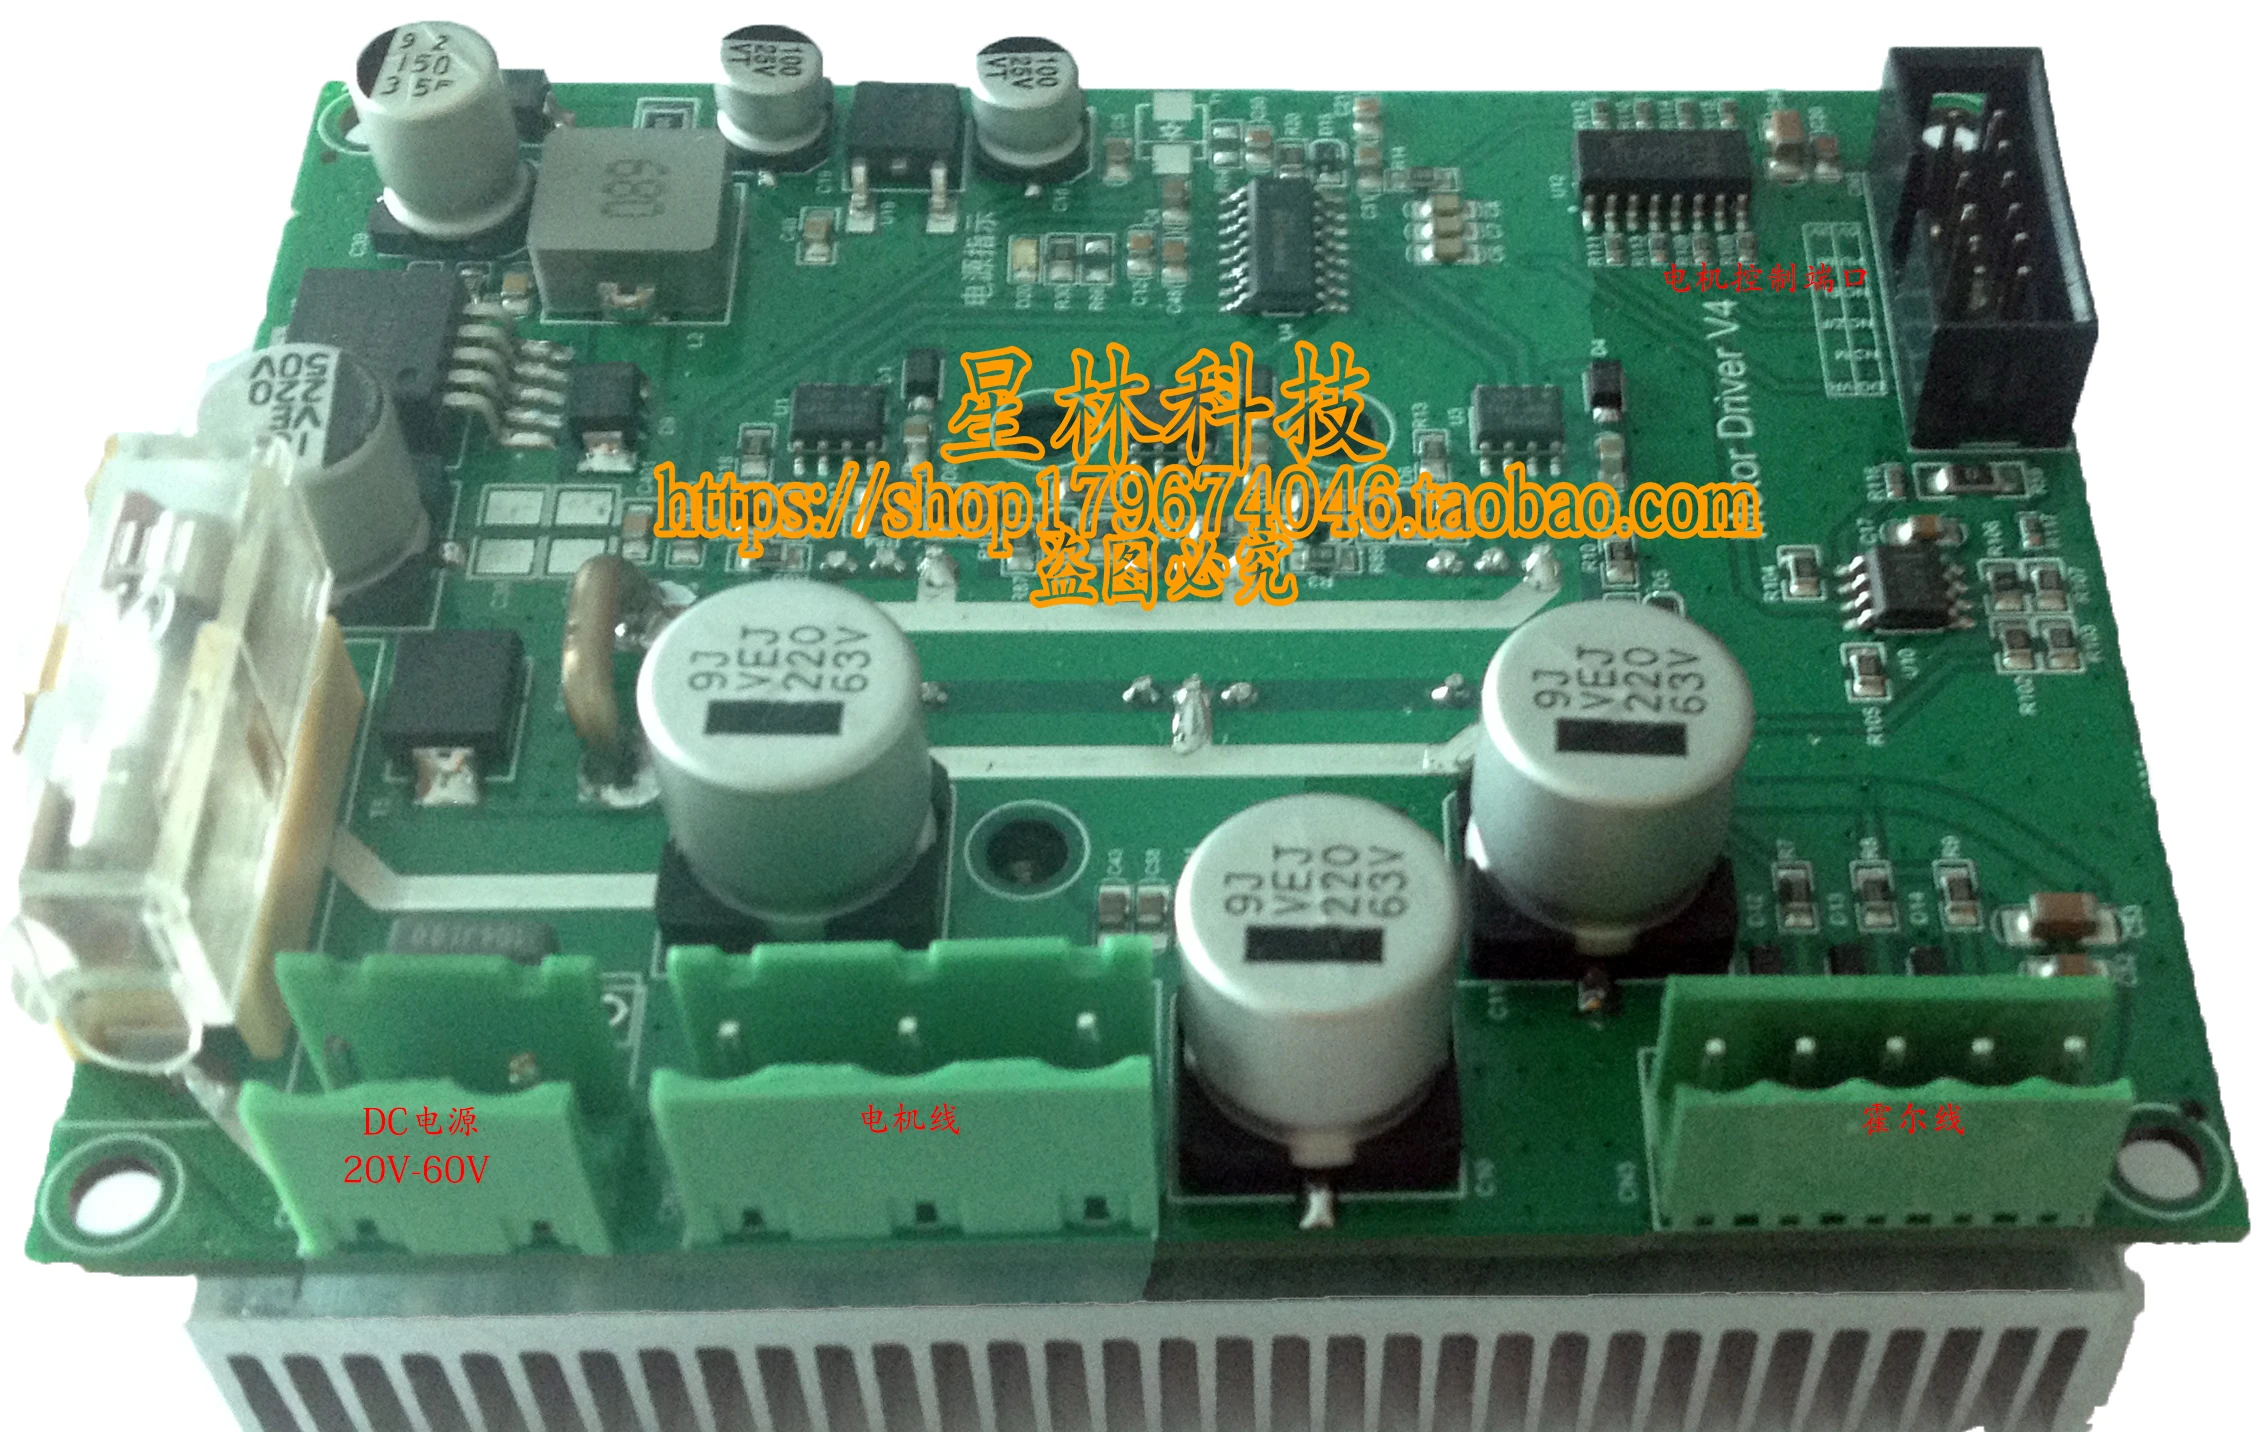 

BLDC Three-phase Brushless DC with Hall Motor Controller Motor Drive Board High Power PLC 3.3V